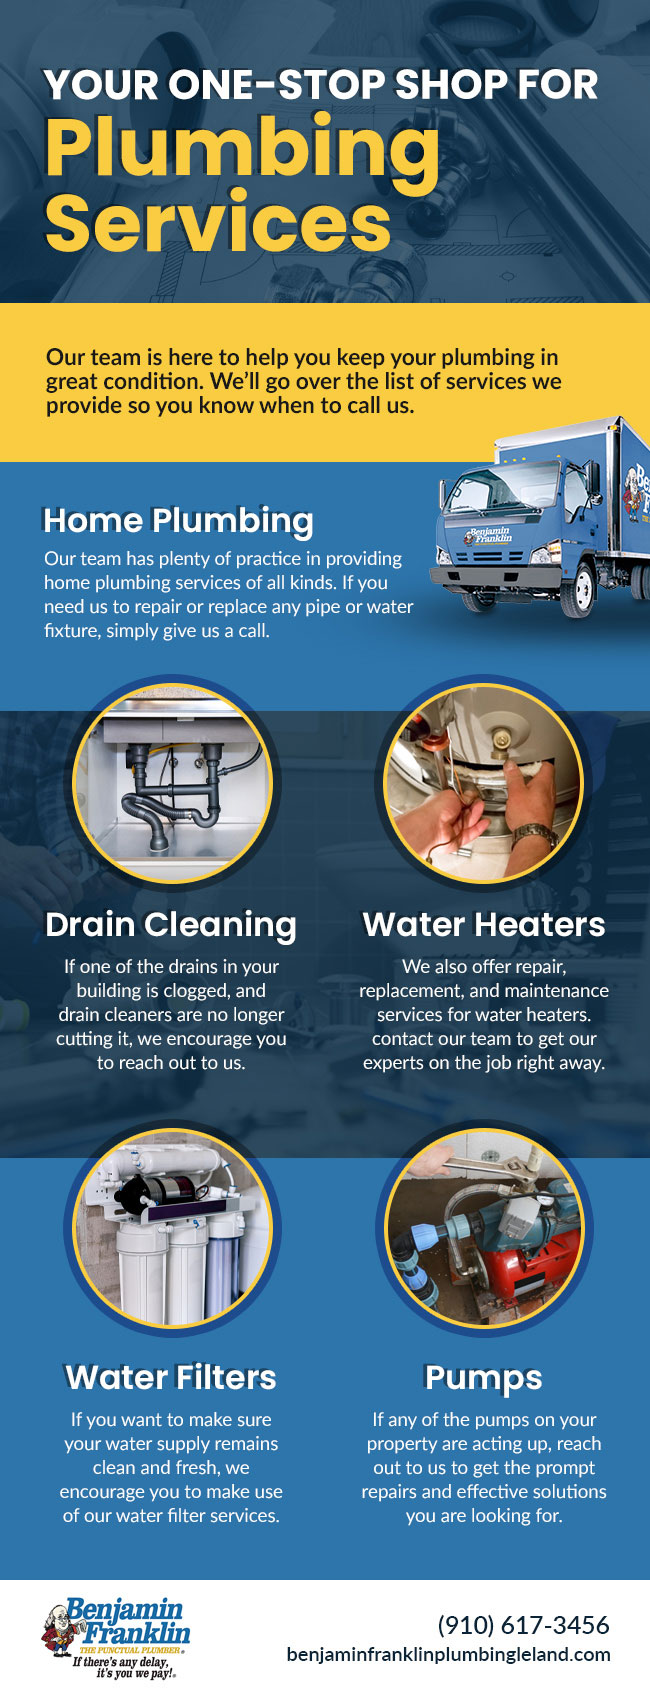 Your One-Stop Shop for Plumbing Services